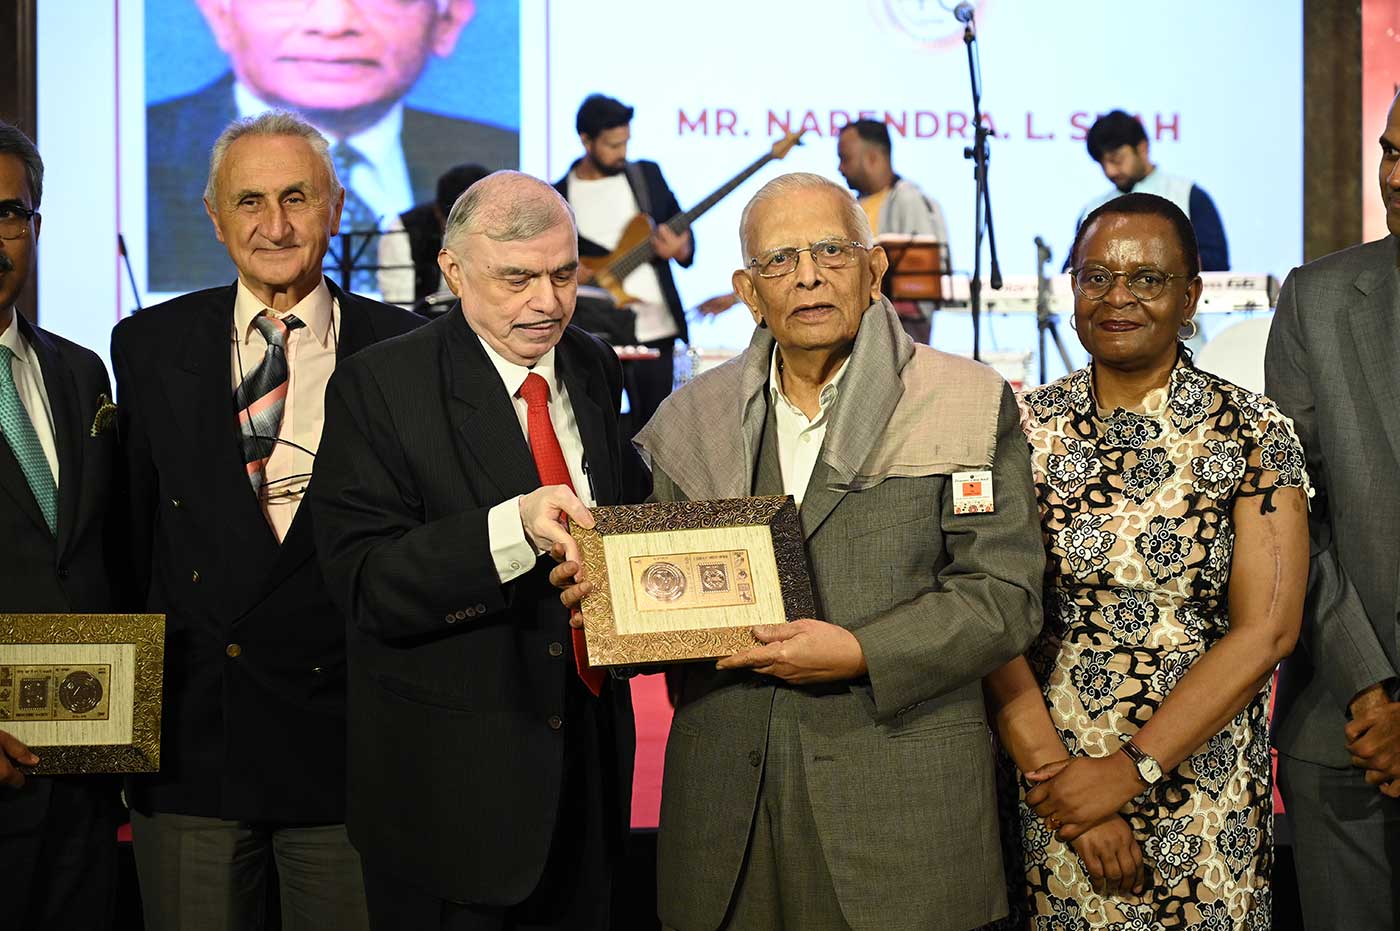 Honoring Shri. Narendra Shah, Past Chairman and advisory council member for his contributions to TEI